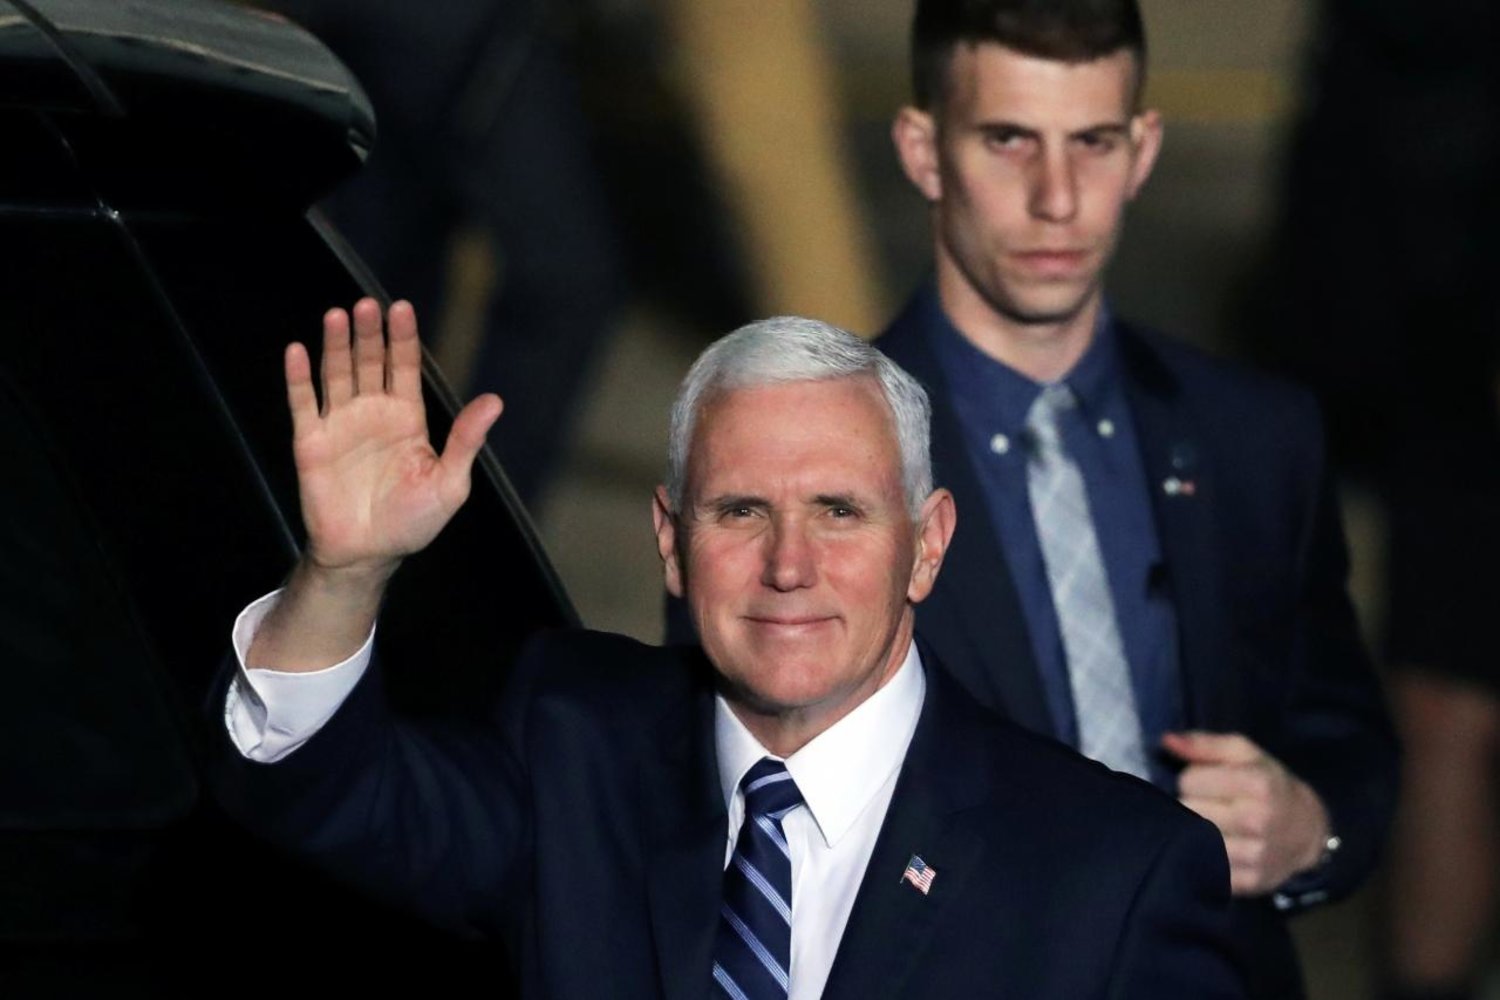 US Vice President Mike Pence waves upon his arrival in Tel Aviv, Israel. (Reuters)